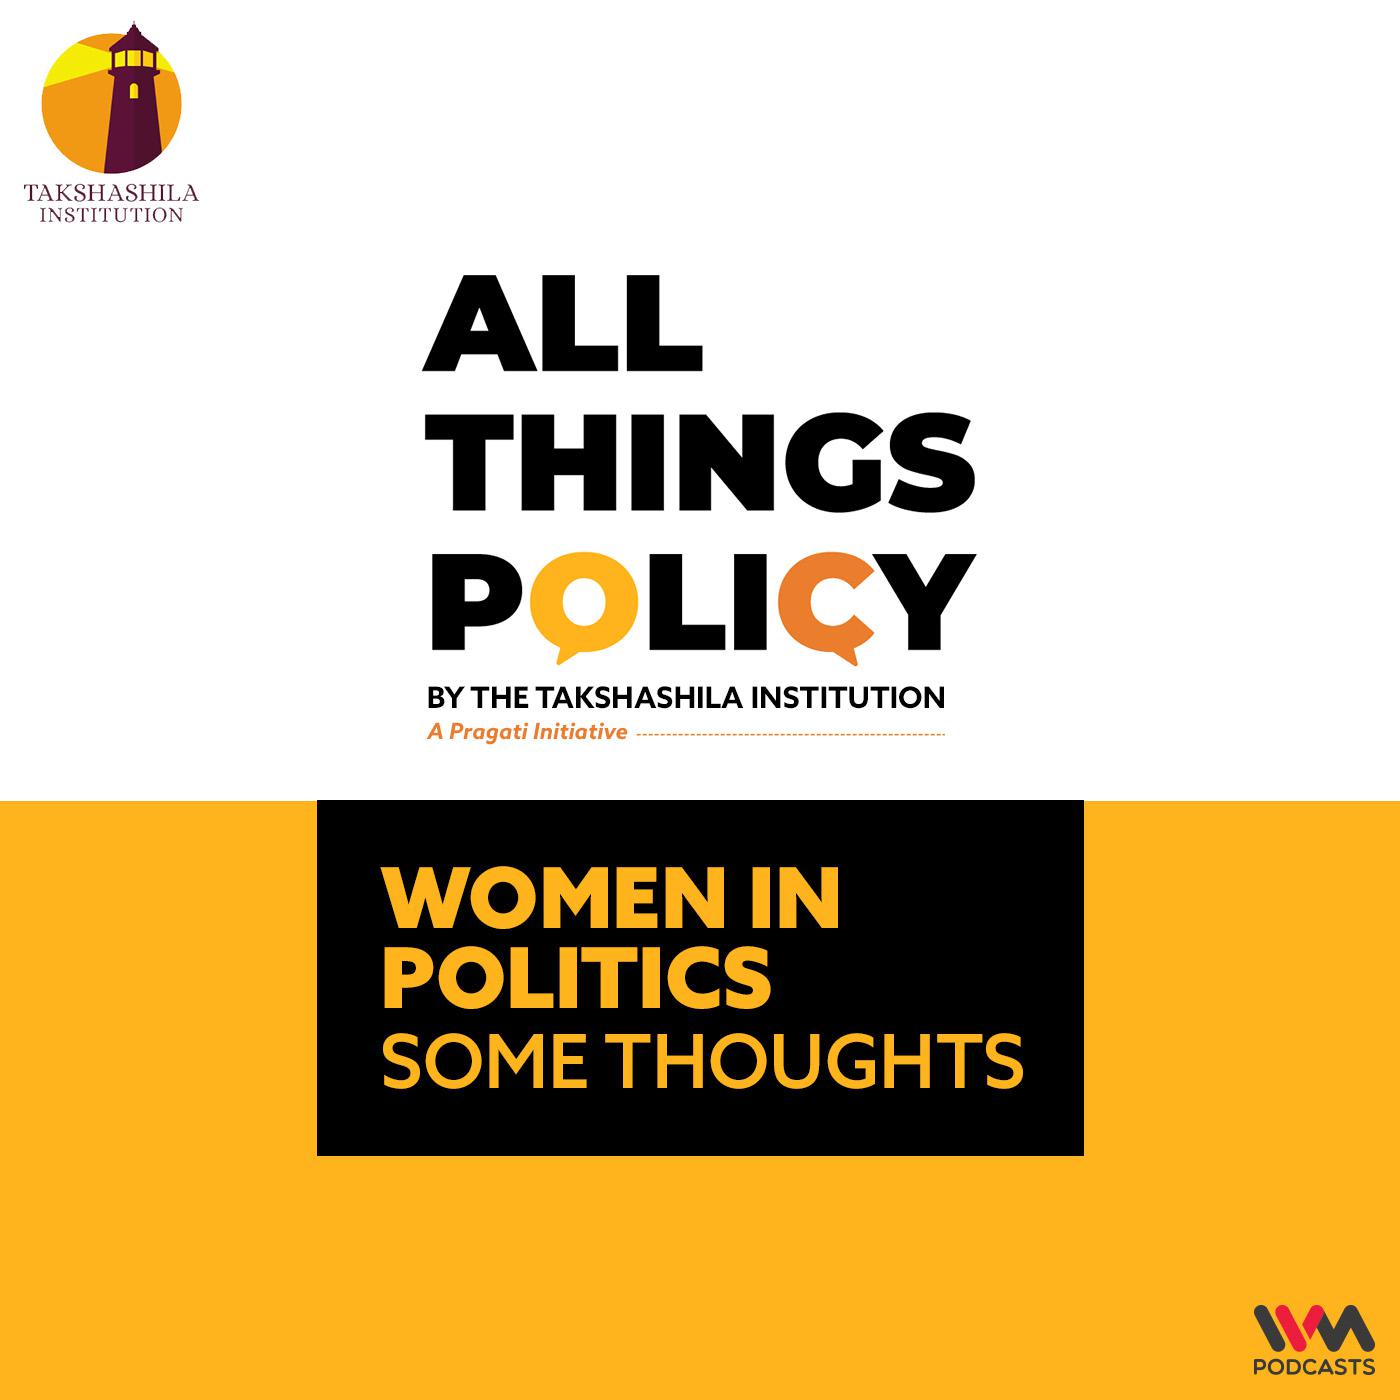 Women in Politics - Some Thoughts